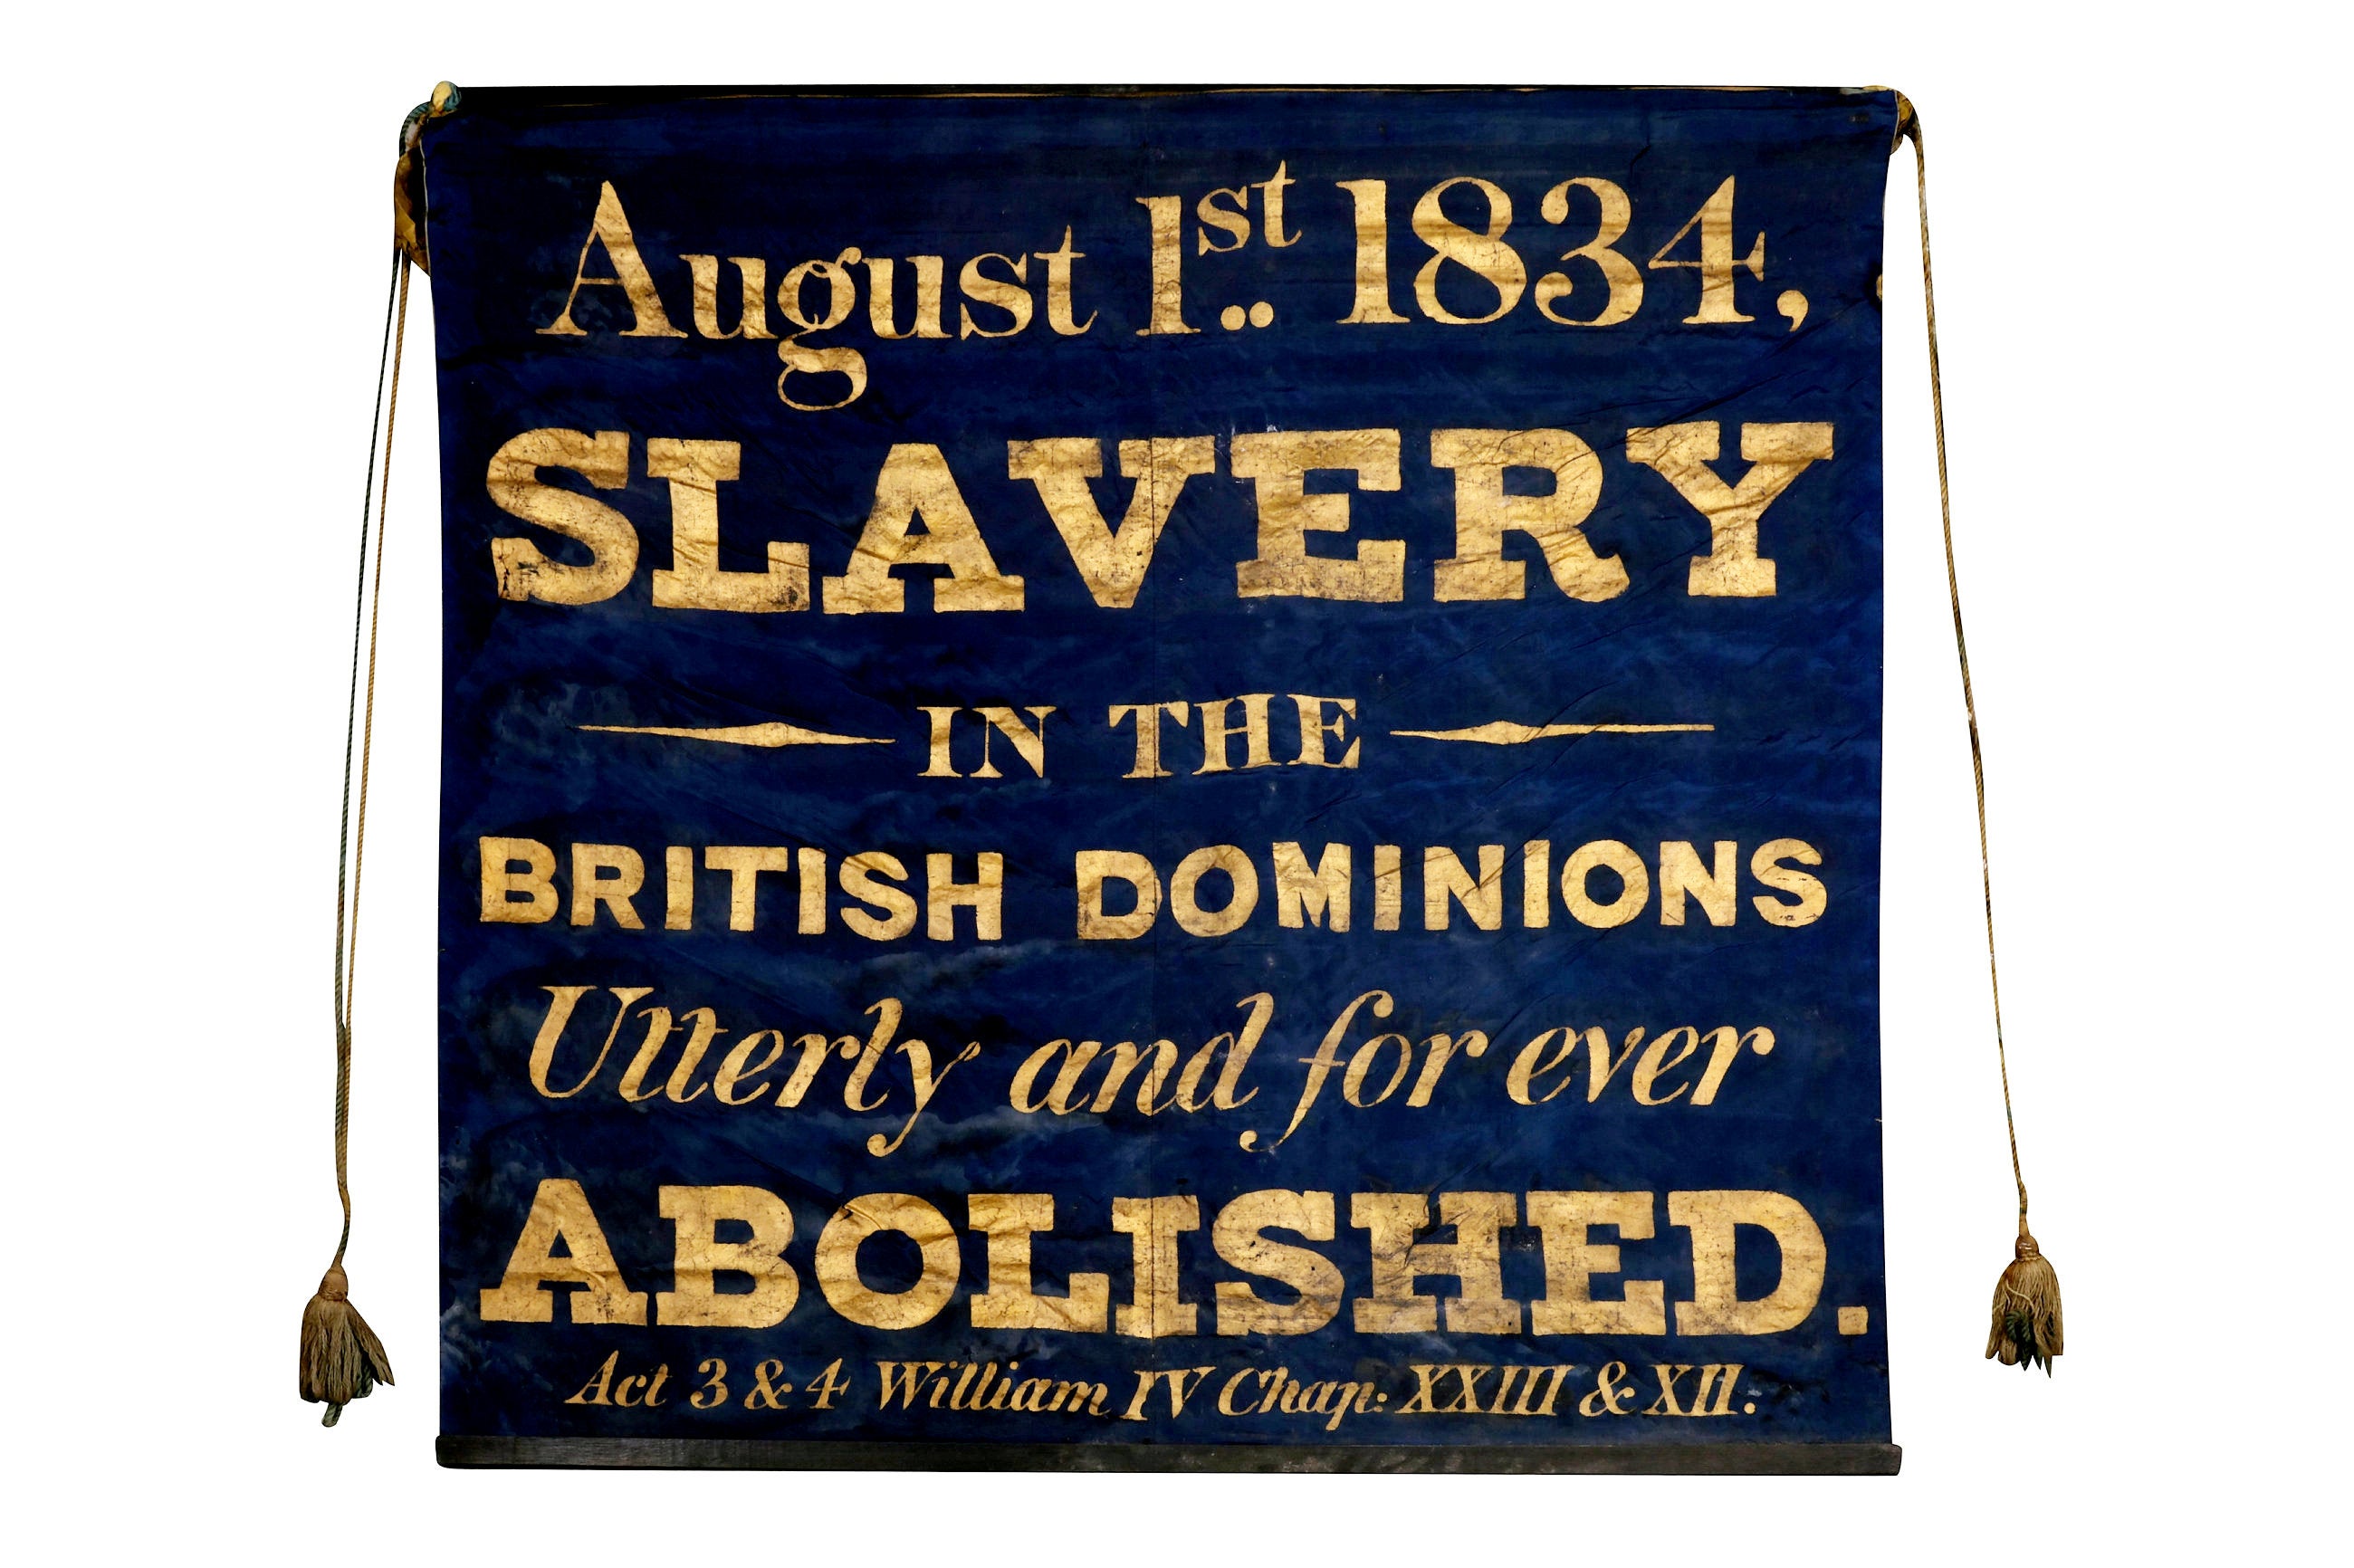 A rare silk banner proclaiming the abolition of slavery in the British empire in 1834 is to be sold at auction